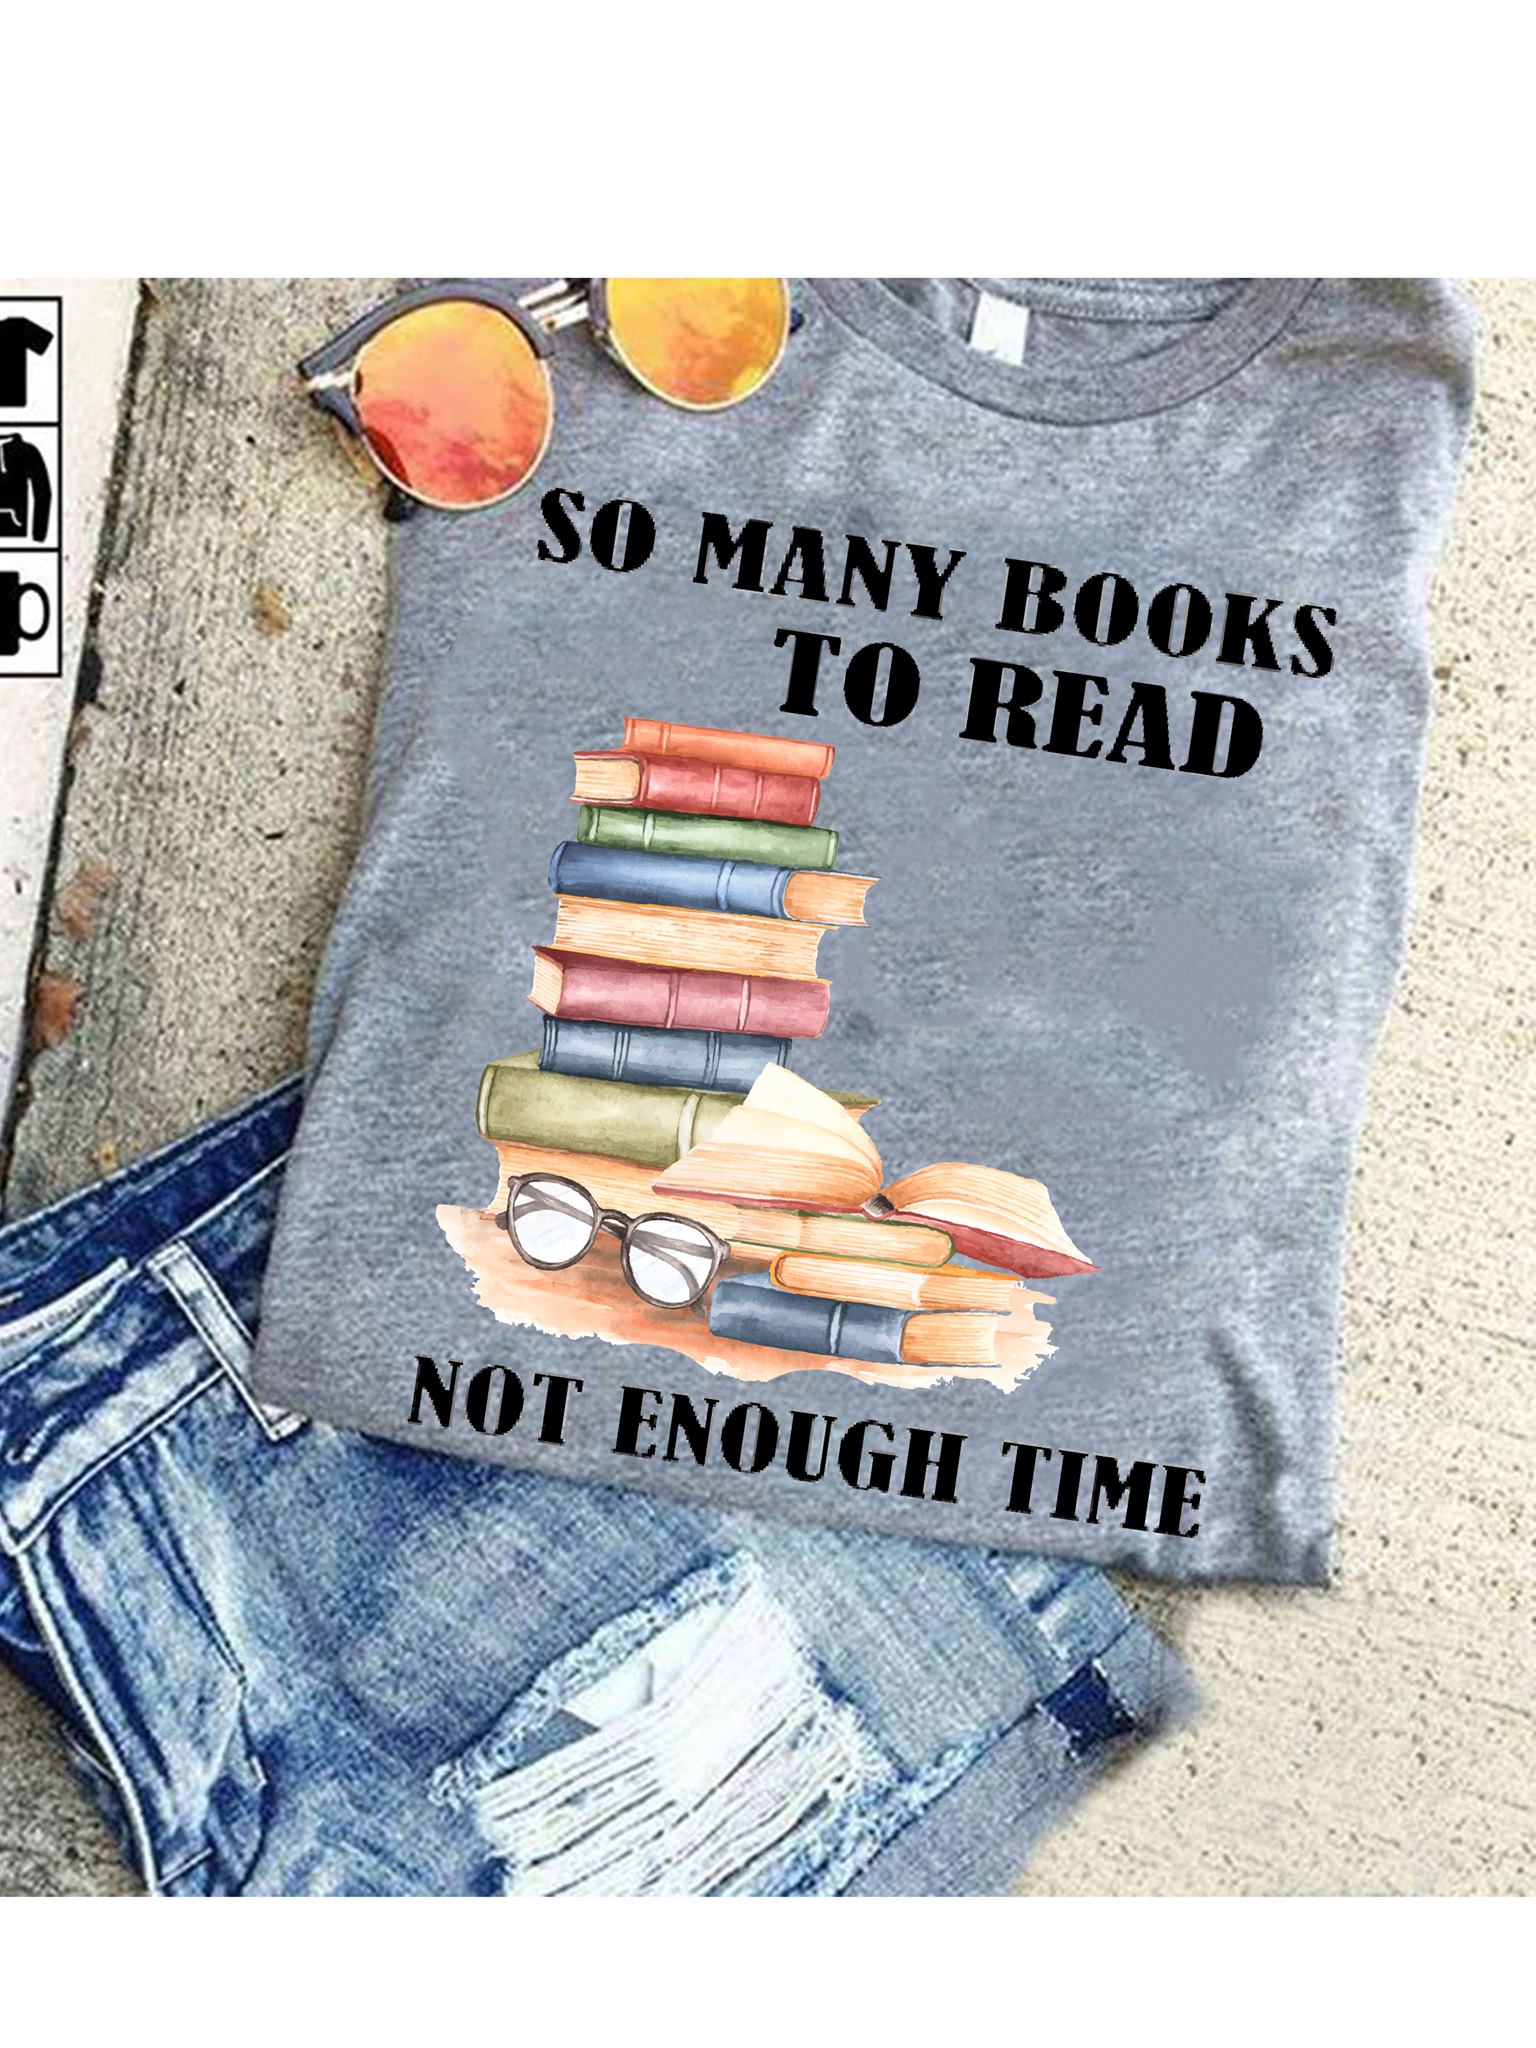 So many books to read not enough time - Book lover